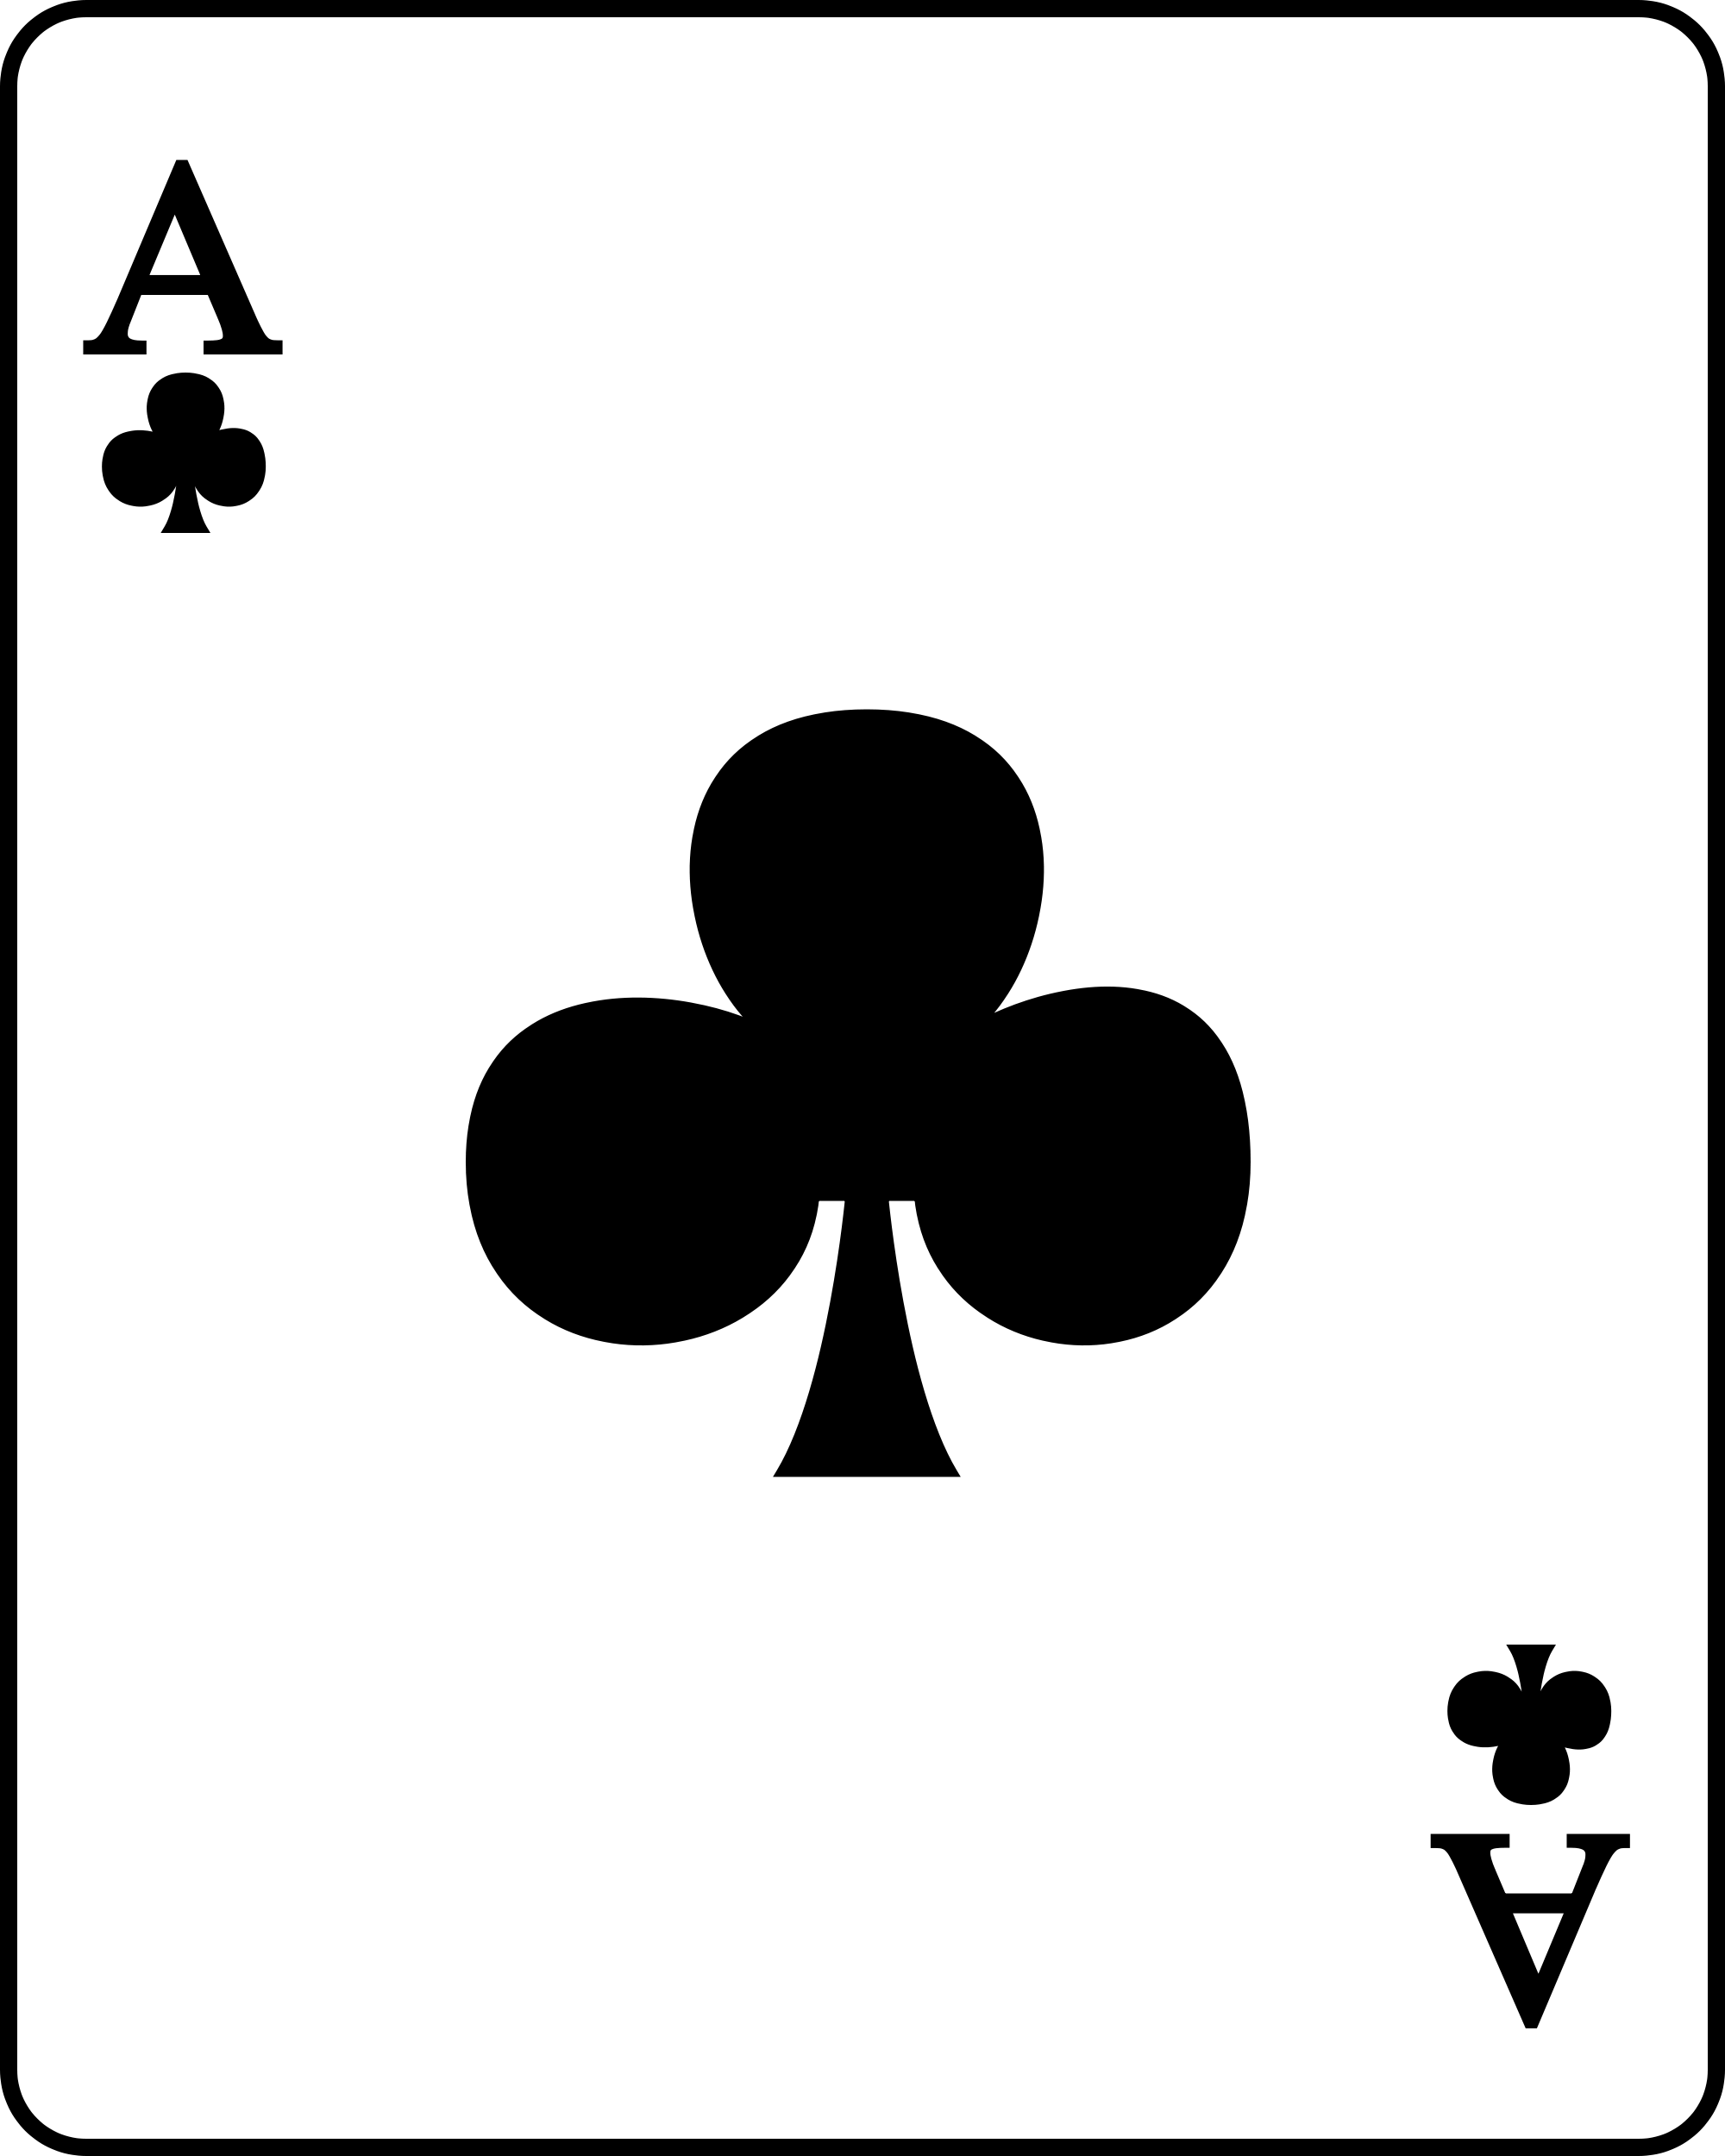 File:Playing card club A.svg